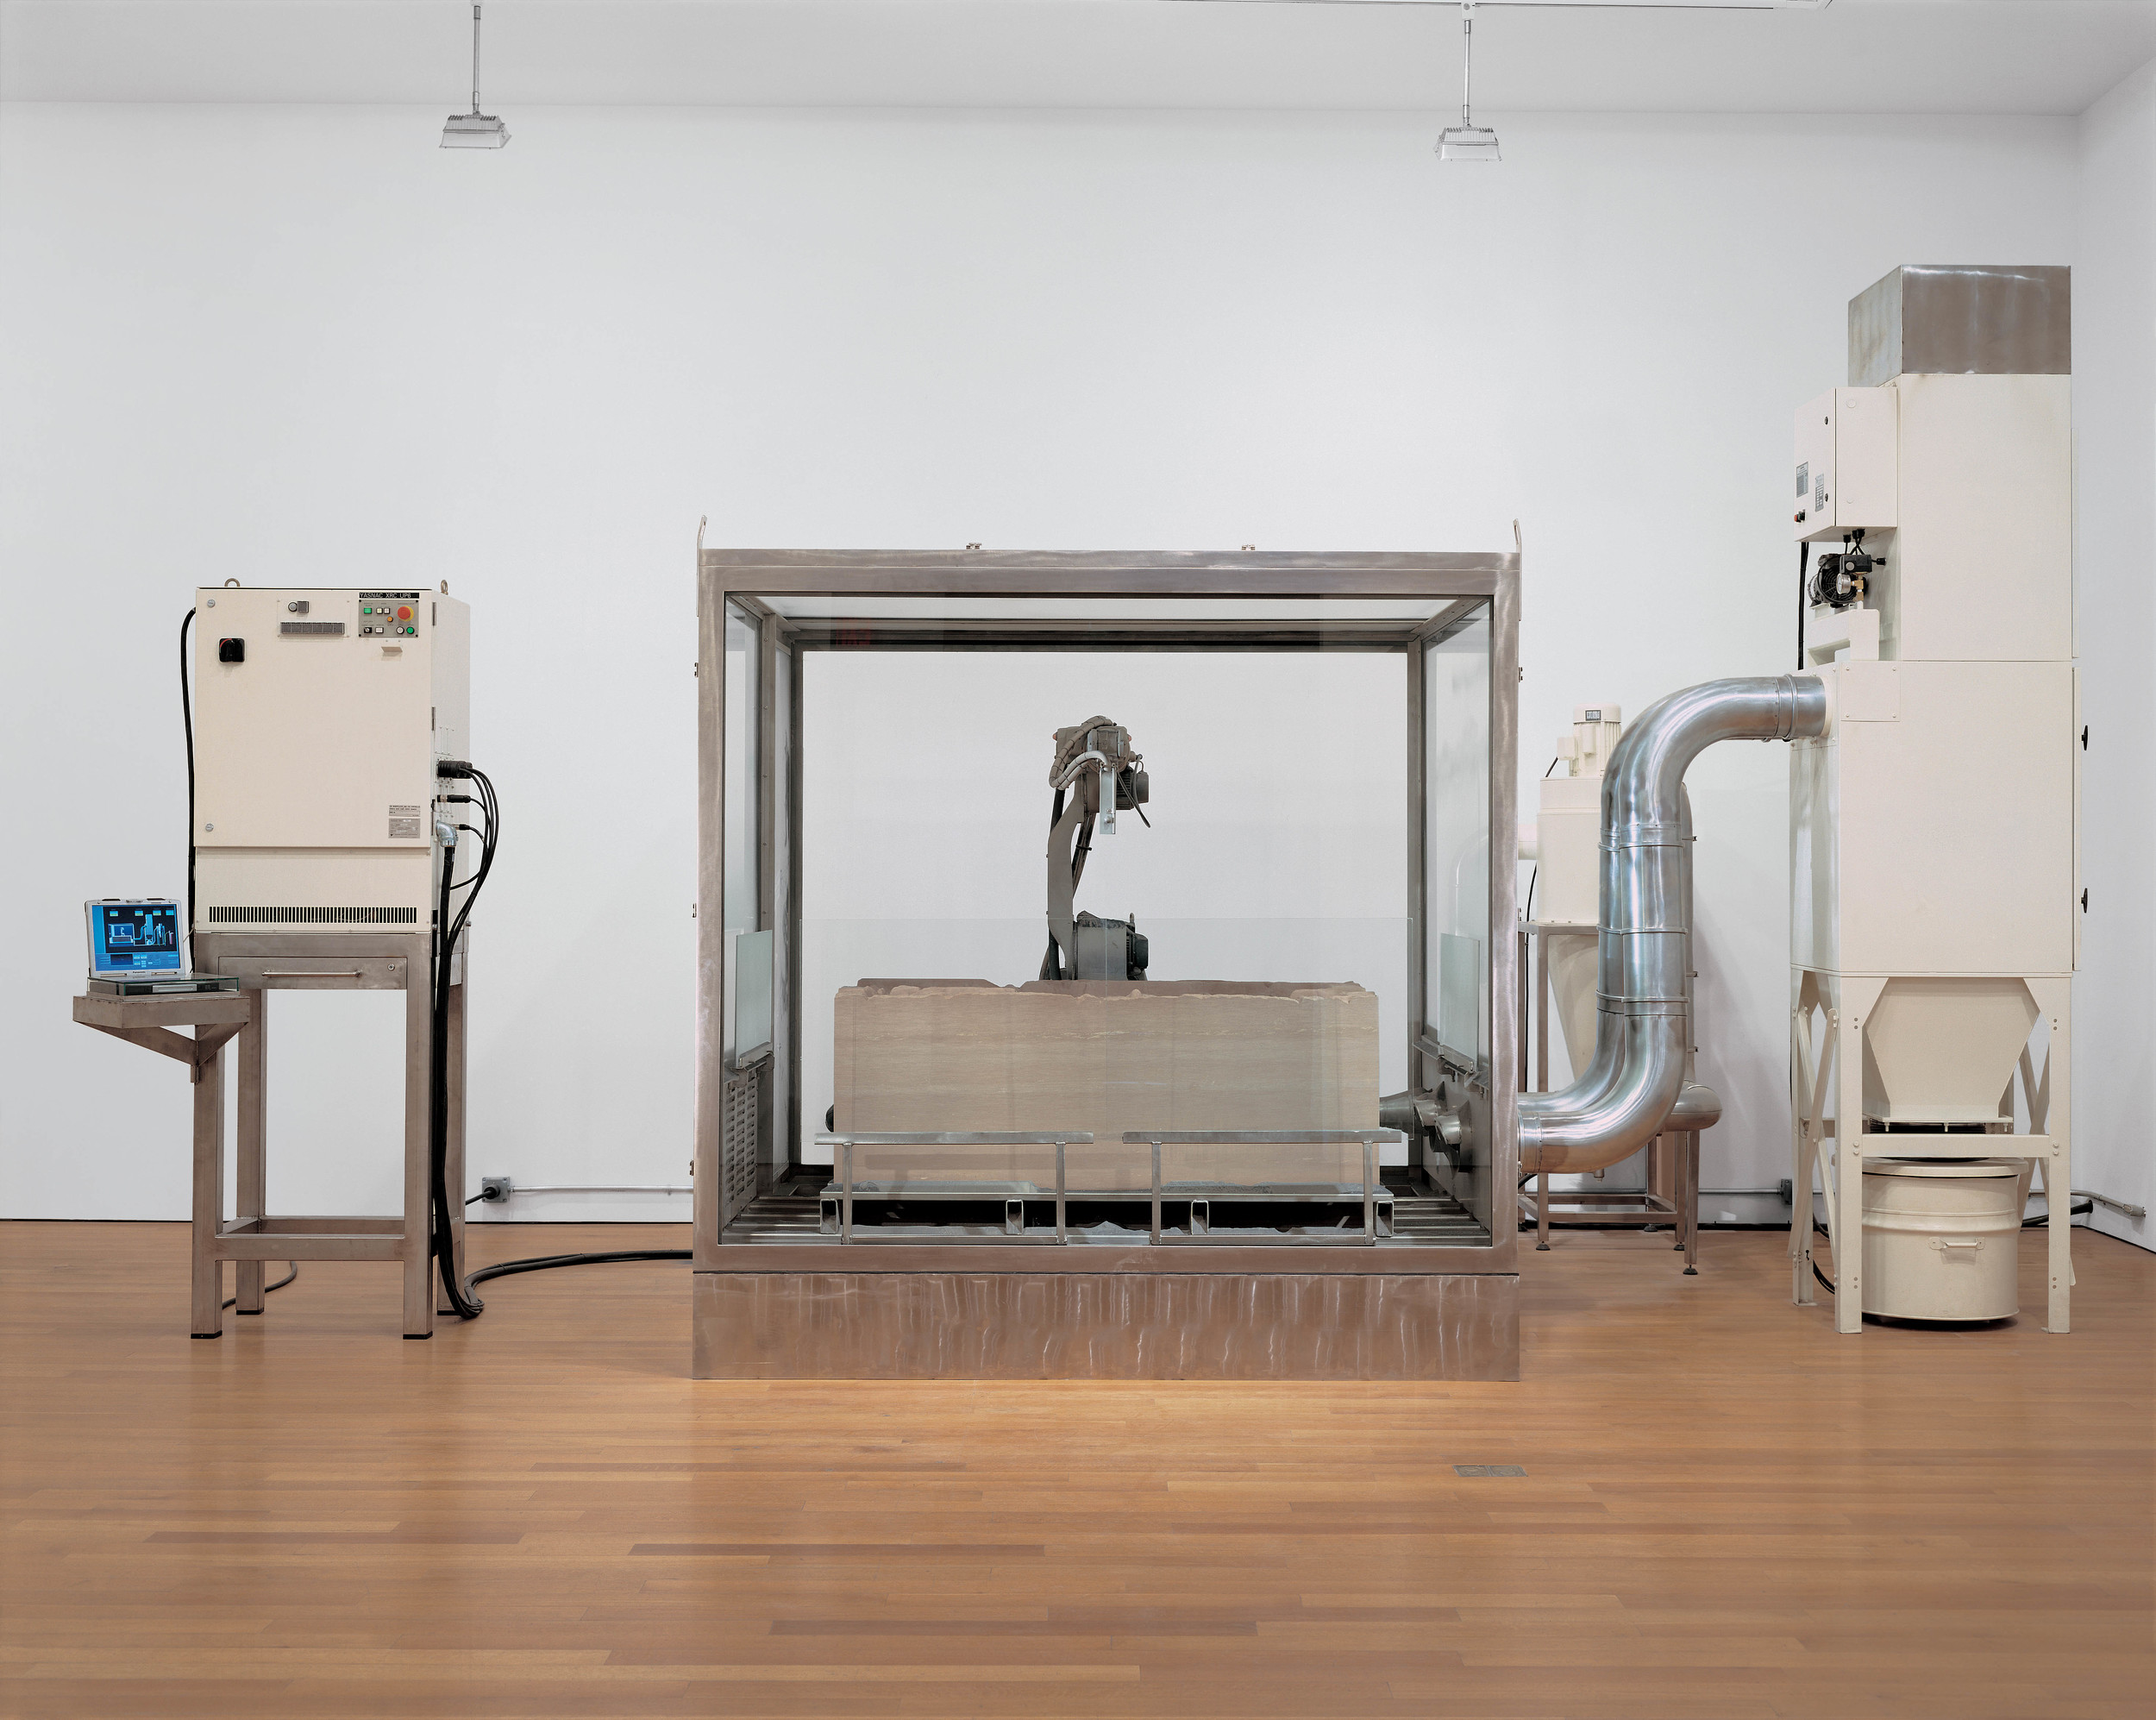  Erosion Machine, 2005, Stainless steel, rubber, felt, glass, galvanized steel, sandstone, silicon carbide, electronics, dust collector, reclaimer, computer, robot, and air, 138 x 252 x 137 inches 